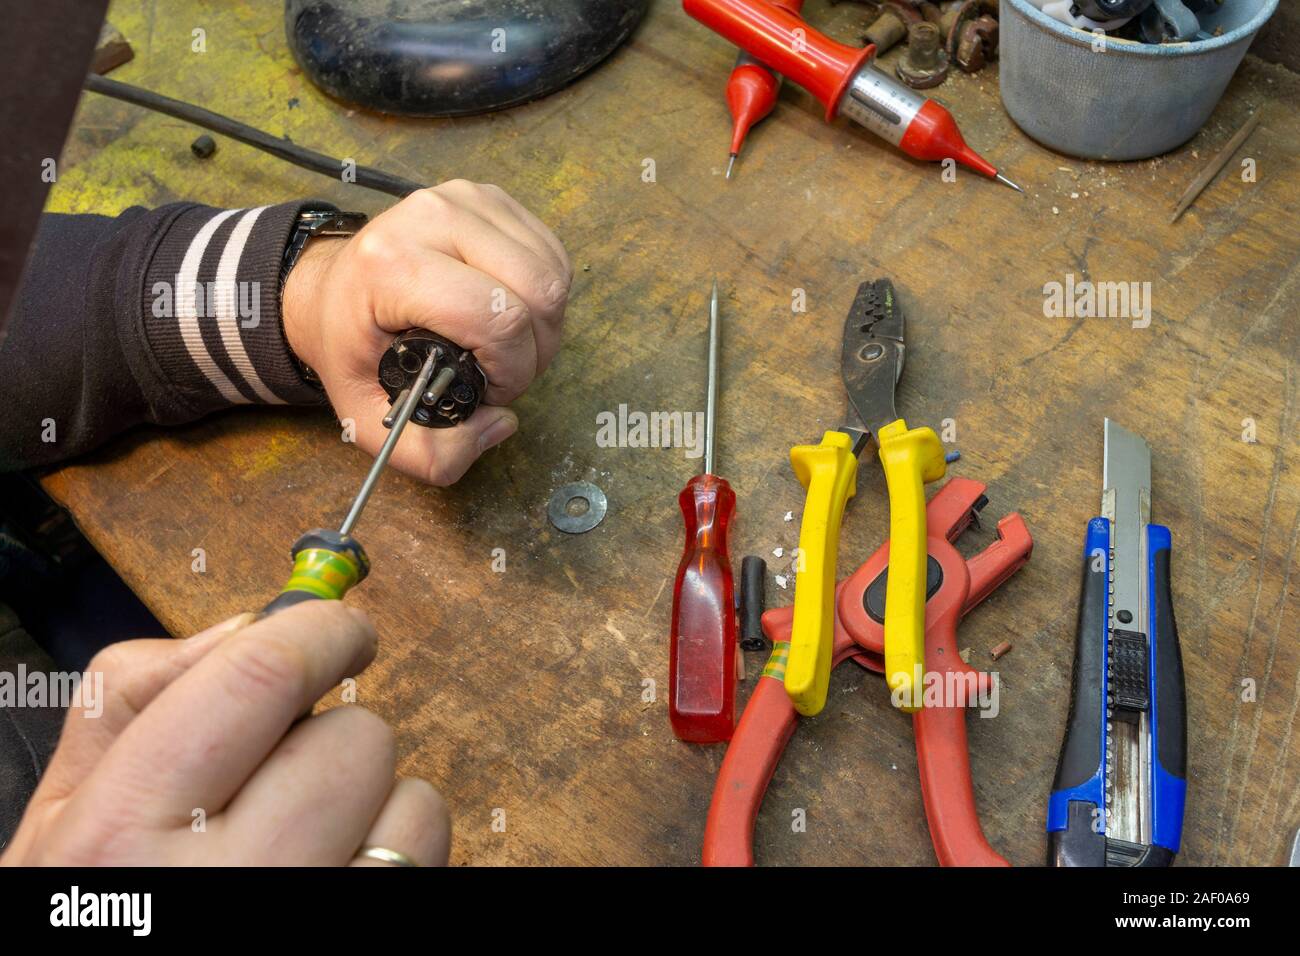 Electrician repairs a cable, there are tools on his workbench. Stock Photo